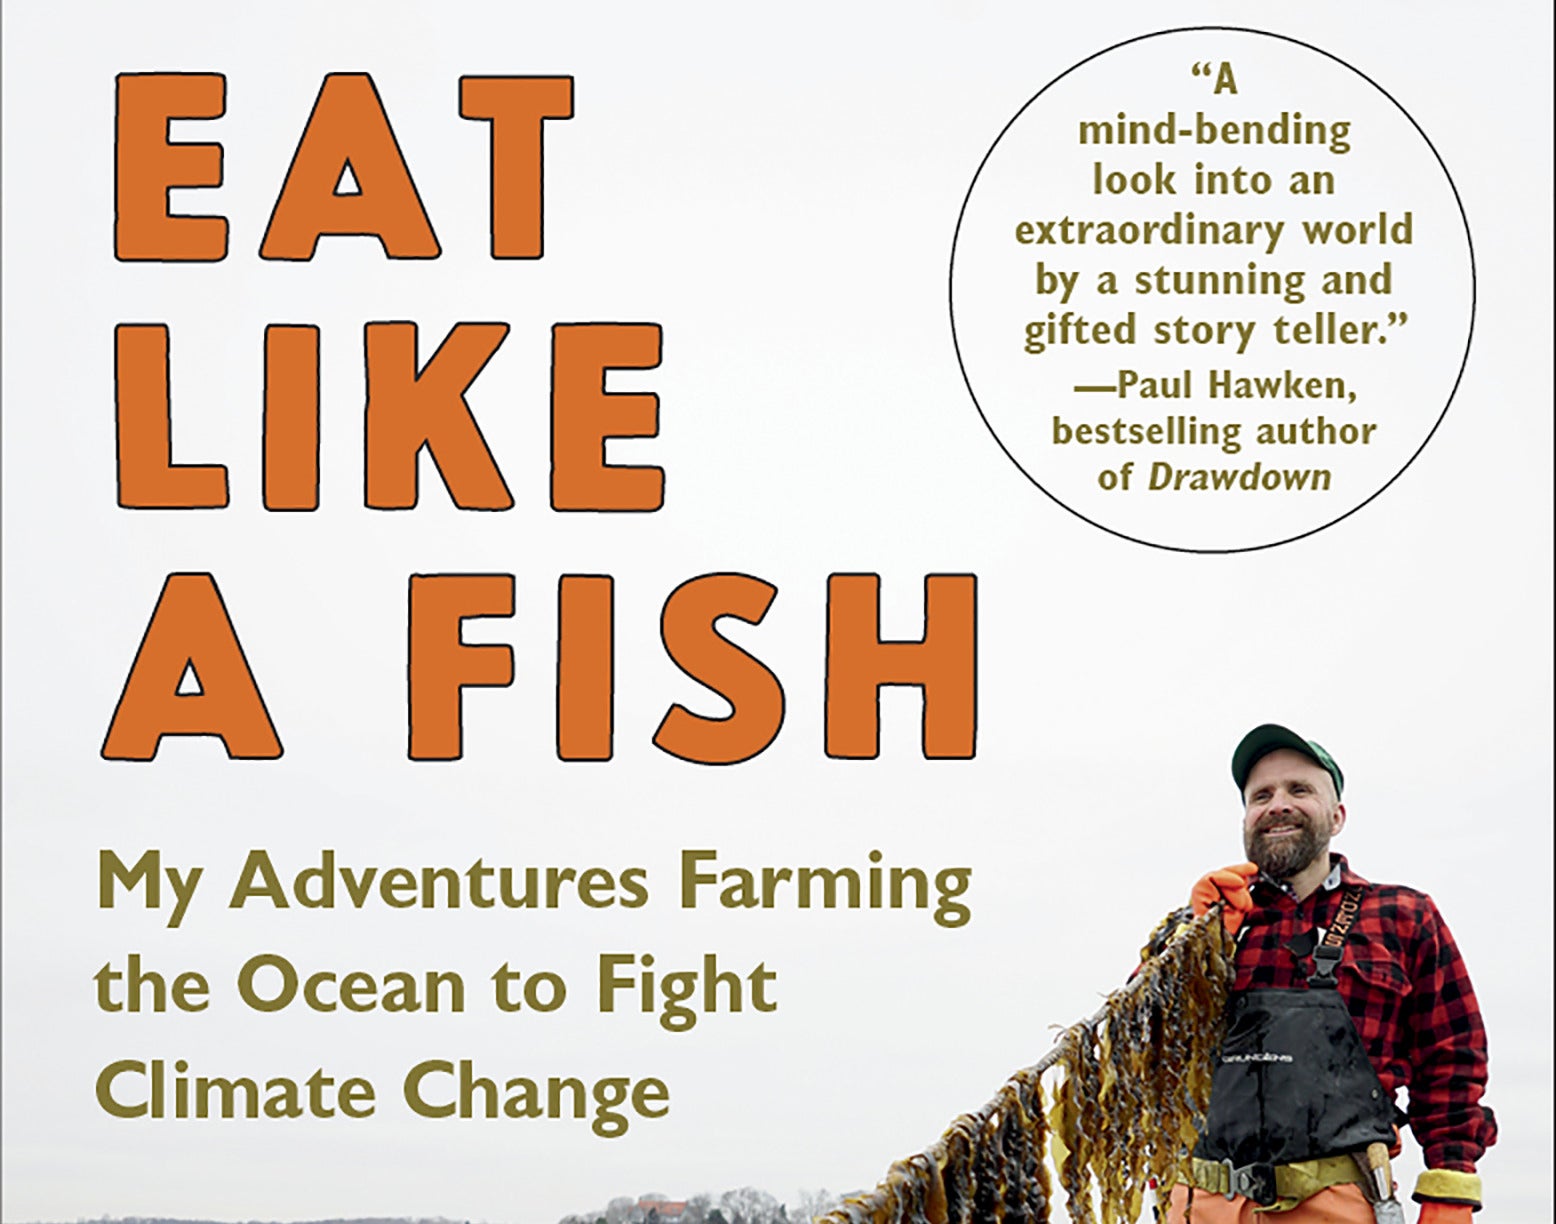 Restorative ocean farmer Bren Smith discusses the future of food through creating a sustainable environment